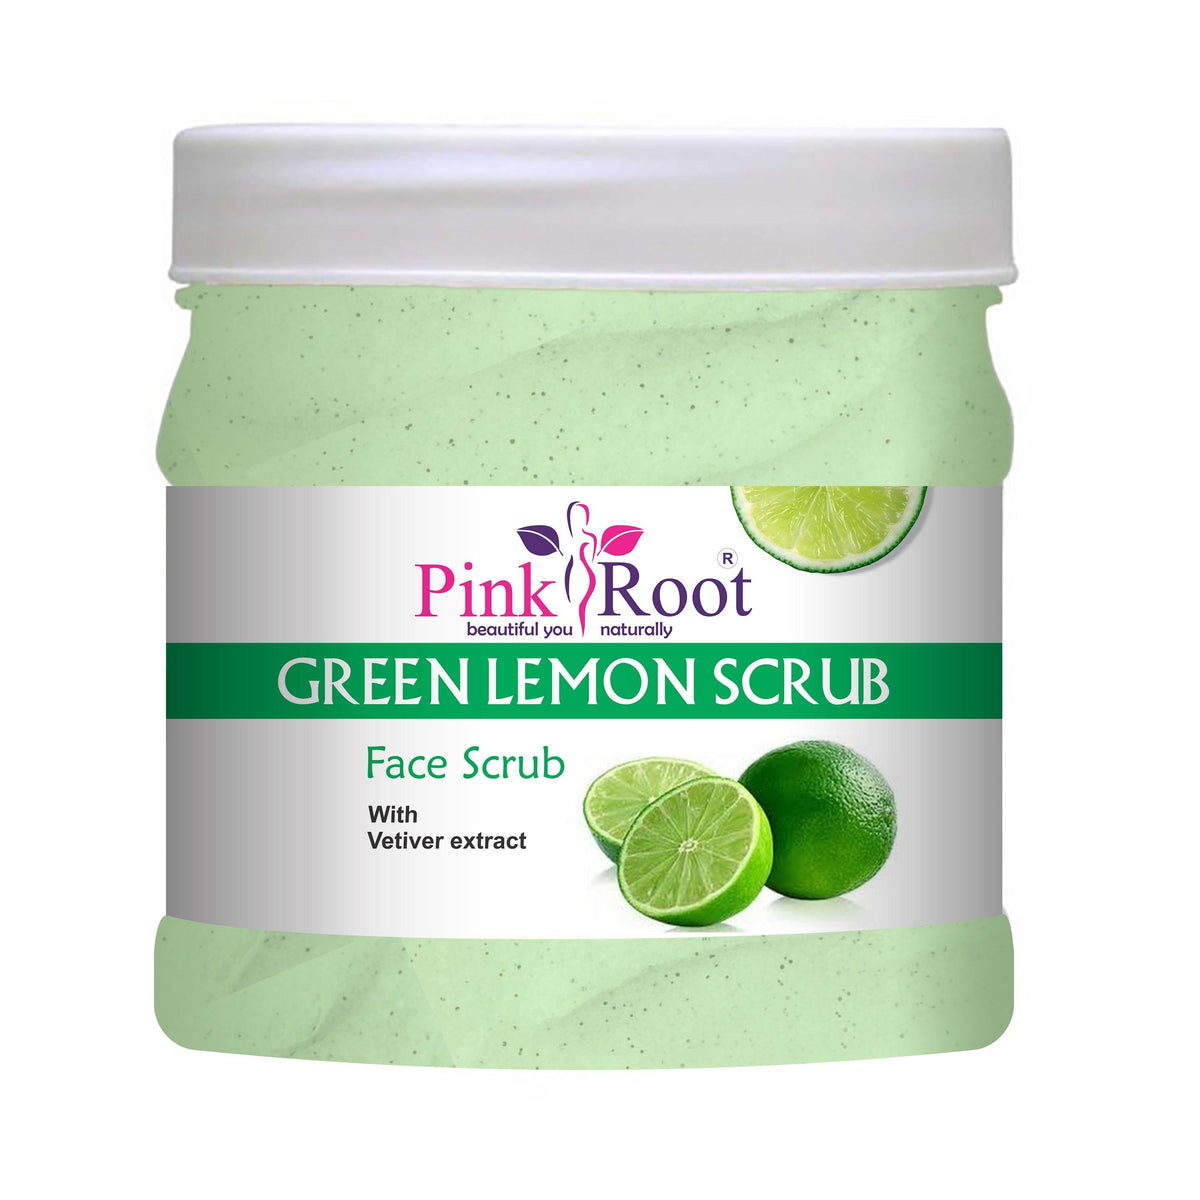 Green Lemon Scrub Face Scrub With Vetiver extract 500ml - Pink Root